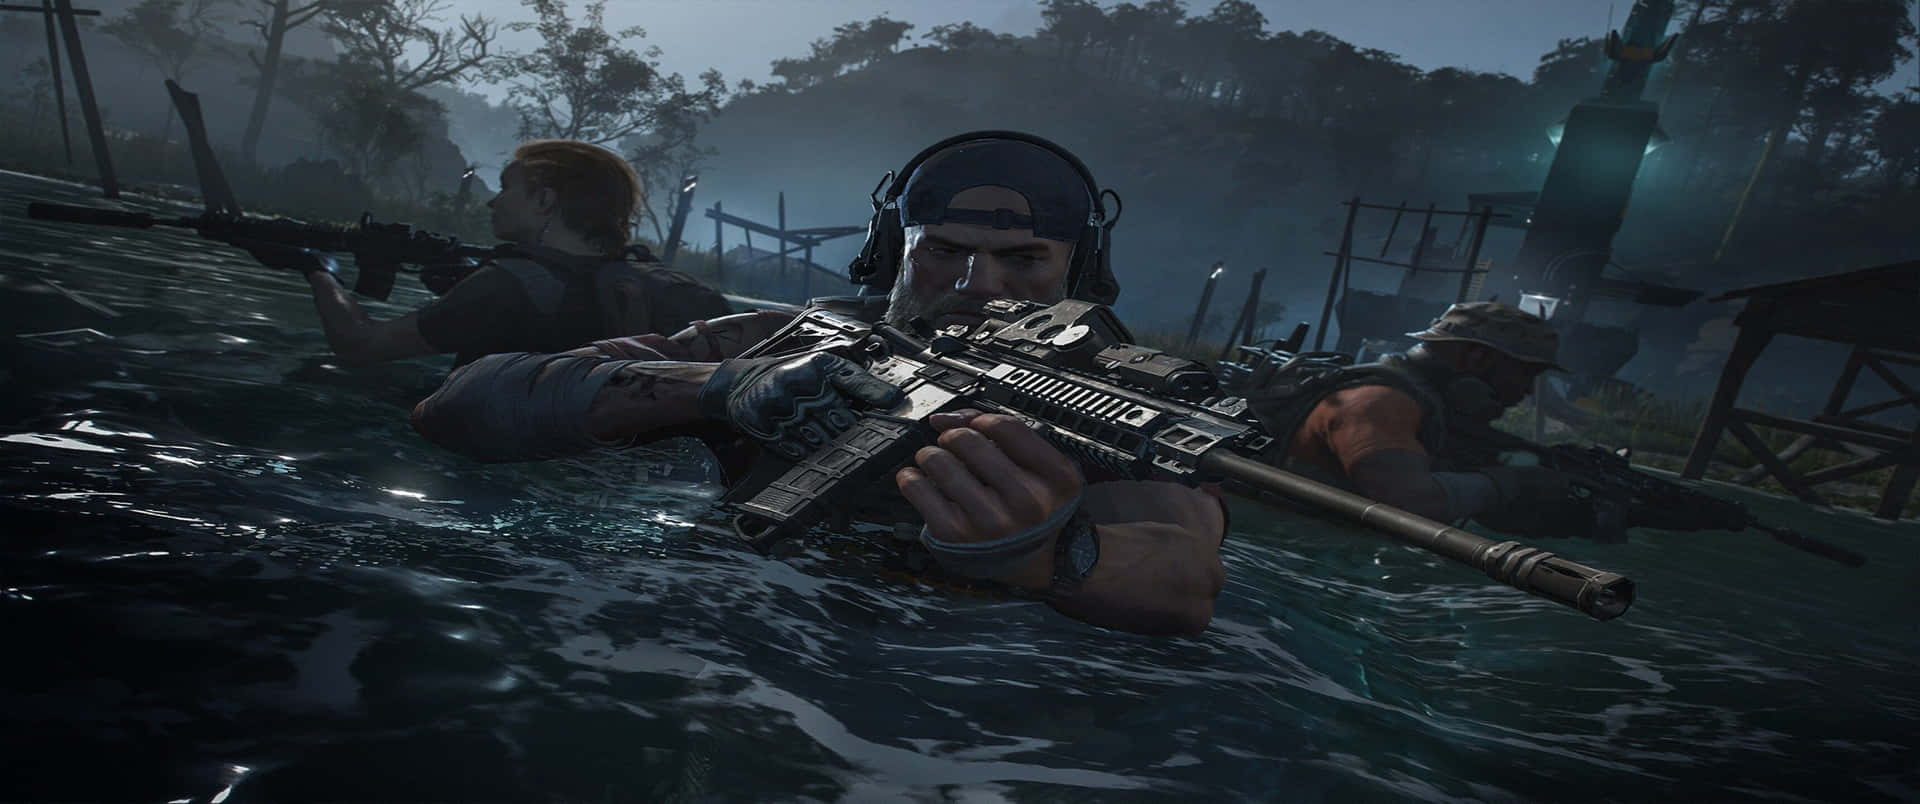 A Group Of Soldiers In The Water With Guns